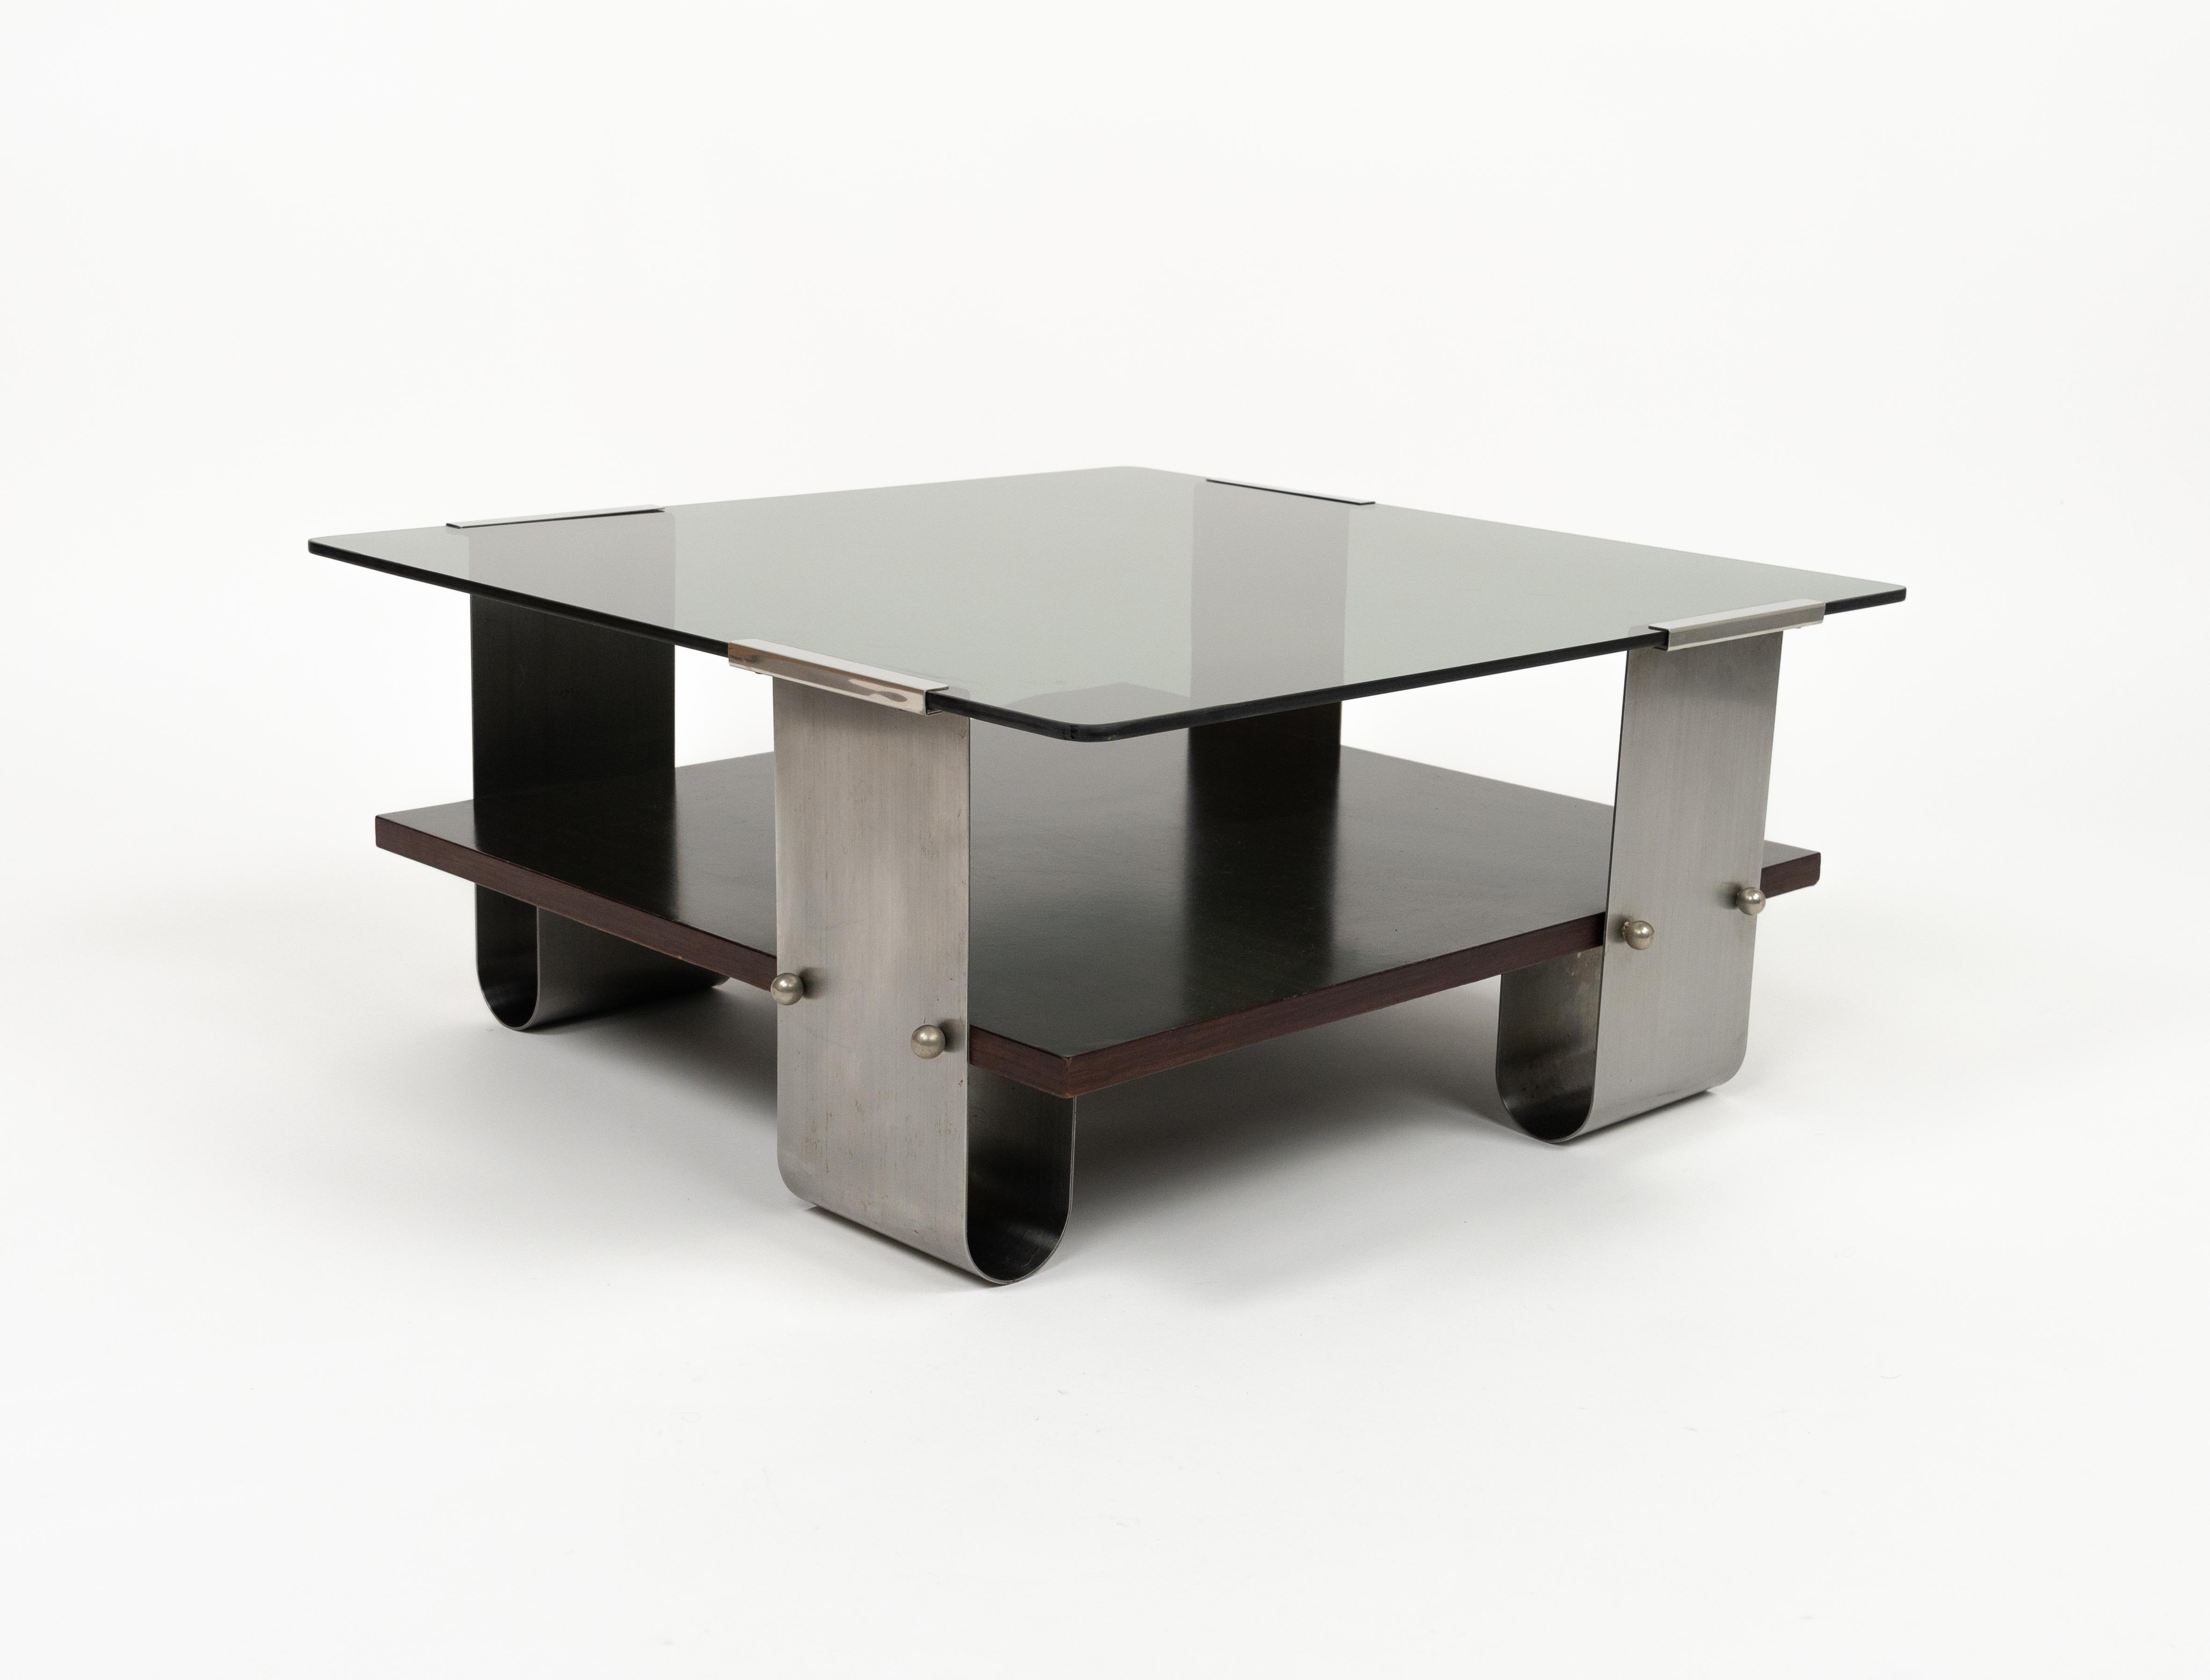 French Midcentury Coffee Table in Steel, Wood & Glass by Francois Monnet, France, 1970s For Sale